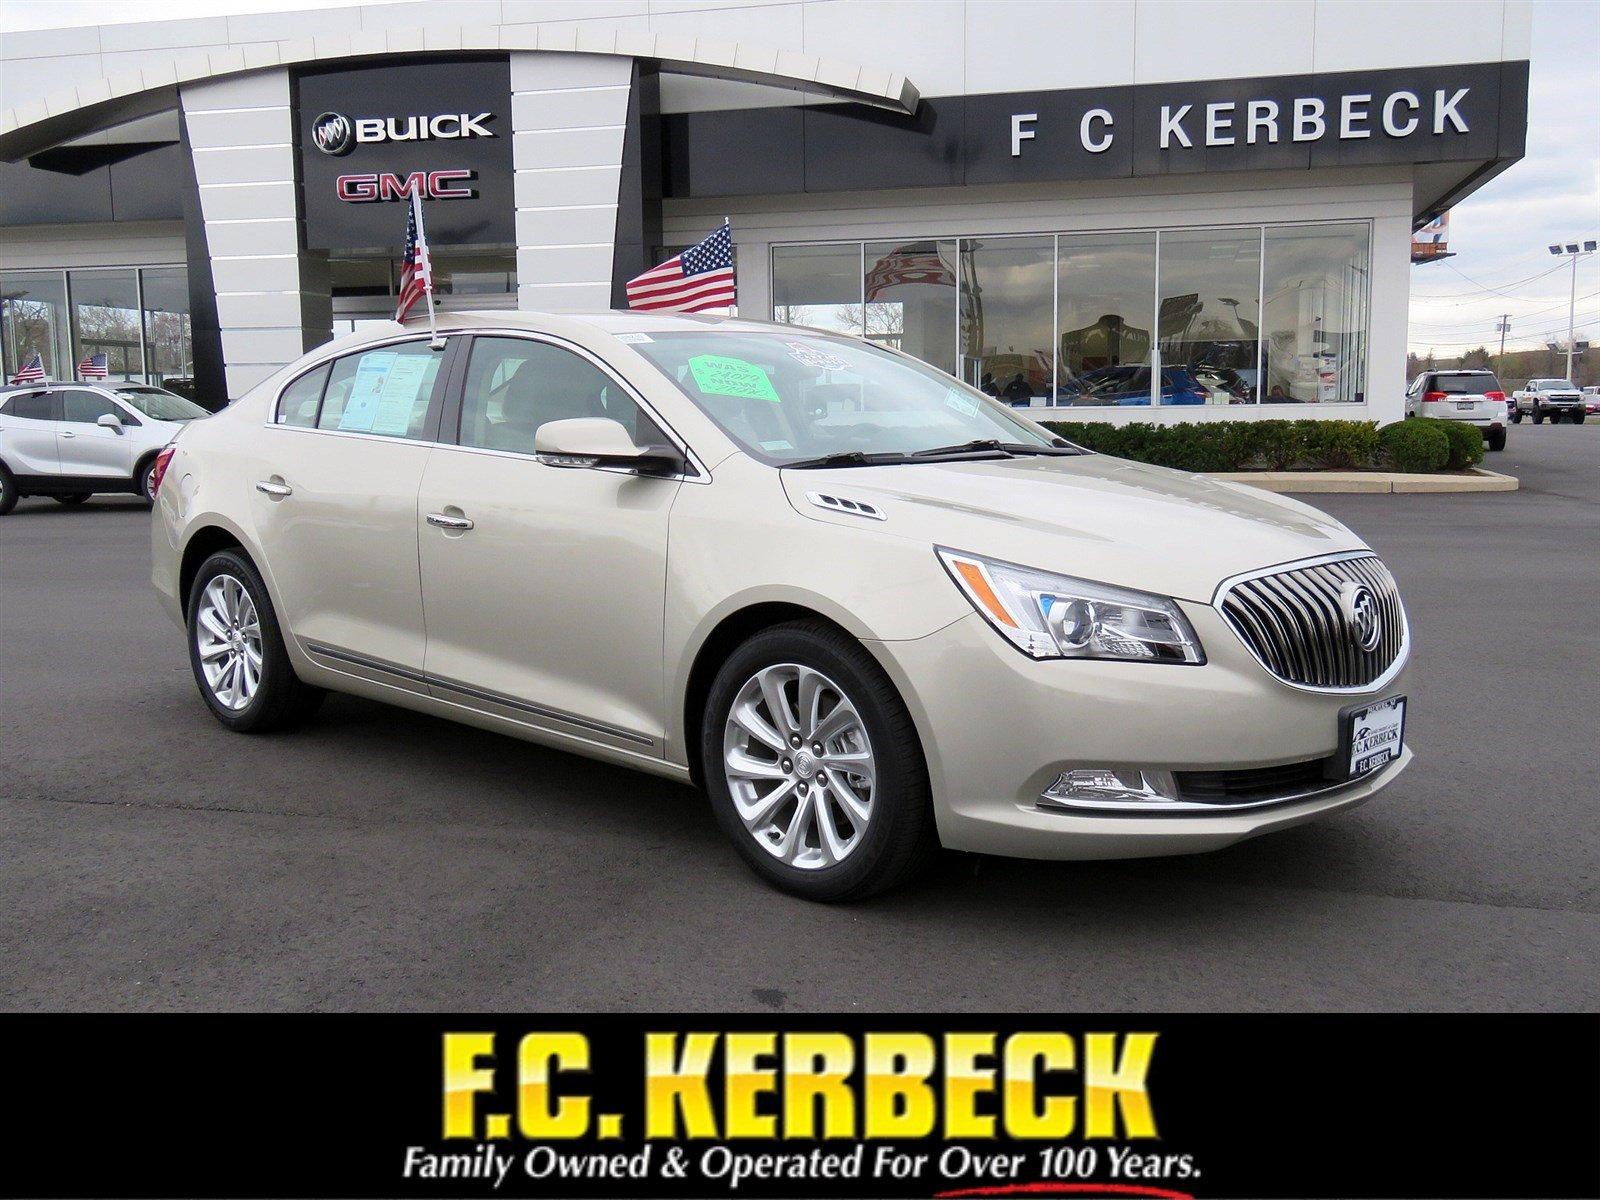 Used 2015 Buick LaCrosse Leather for sale Sold at F.C. Kerbeck Lamborghini Palmyra N.J. in Palmyra NJ 08065 1